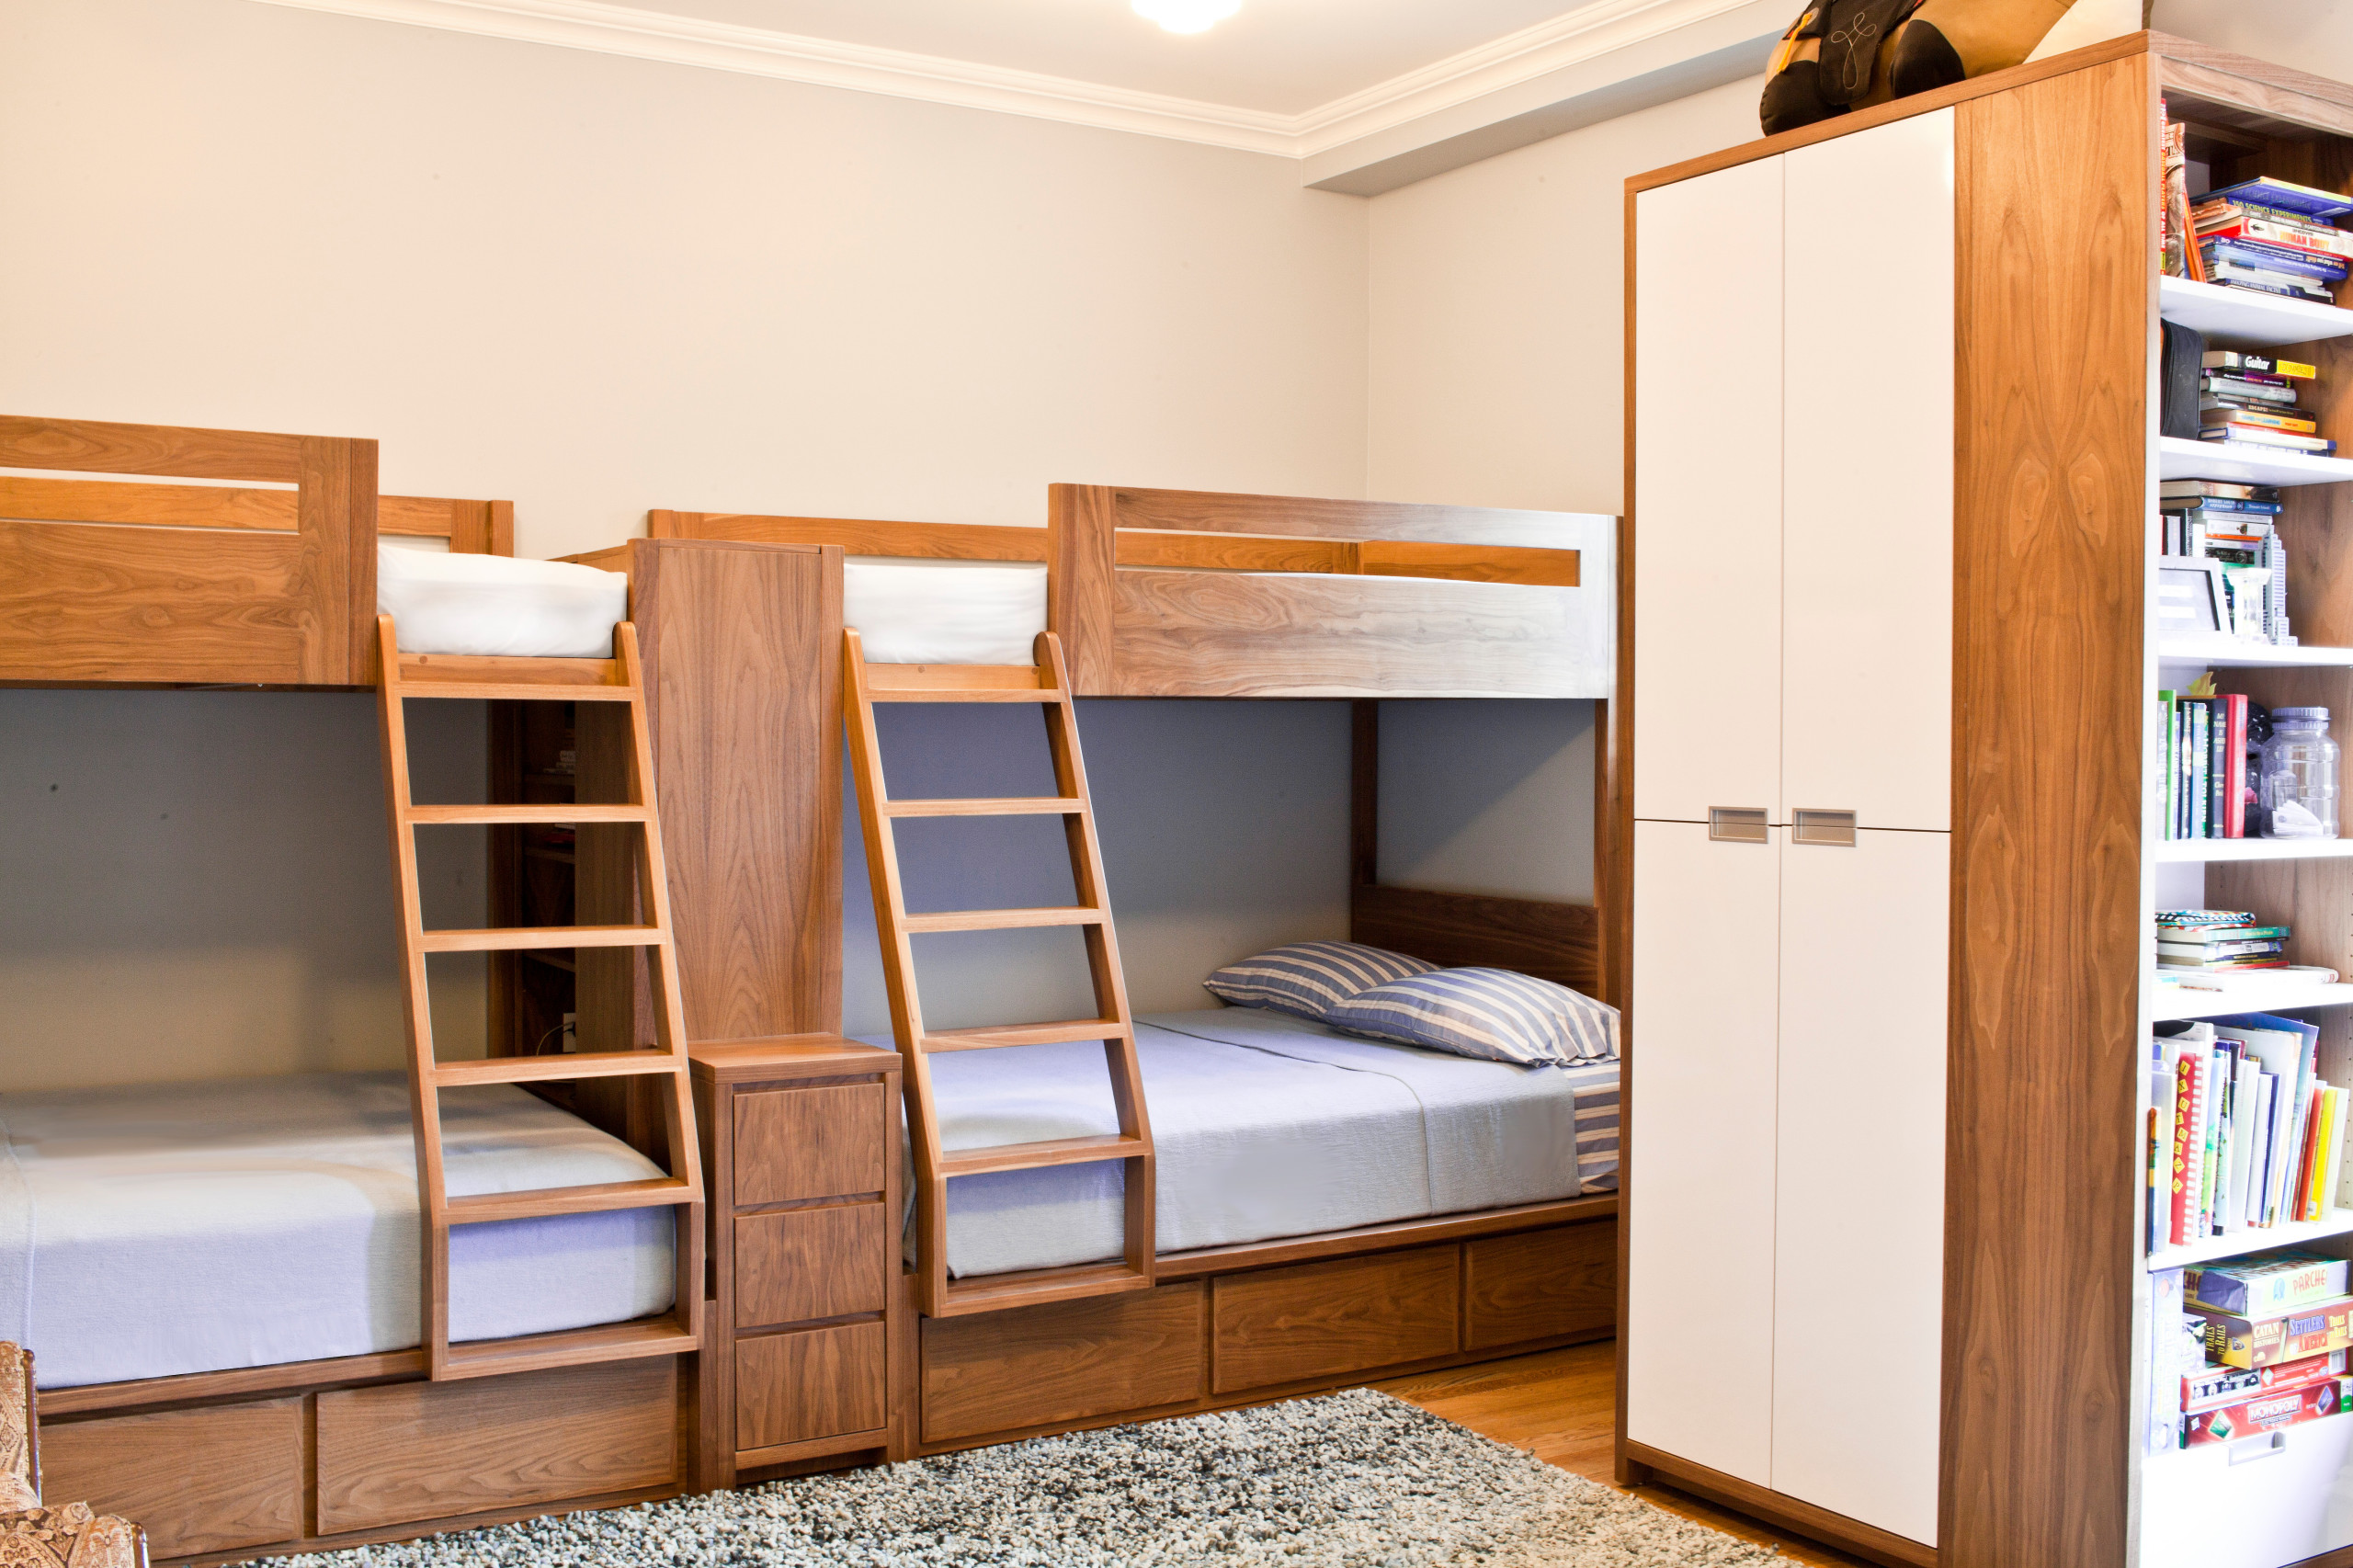 Bunk Bed Office Houzz, Bunk Bed Office